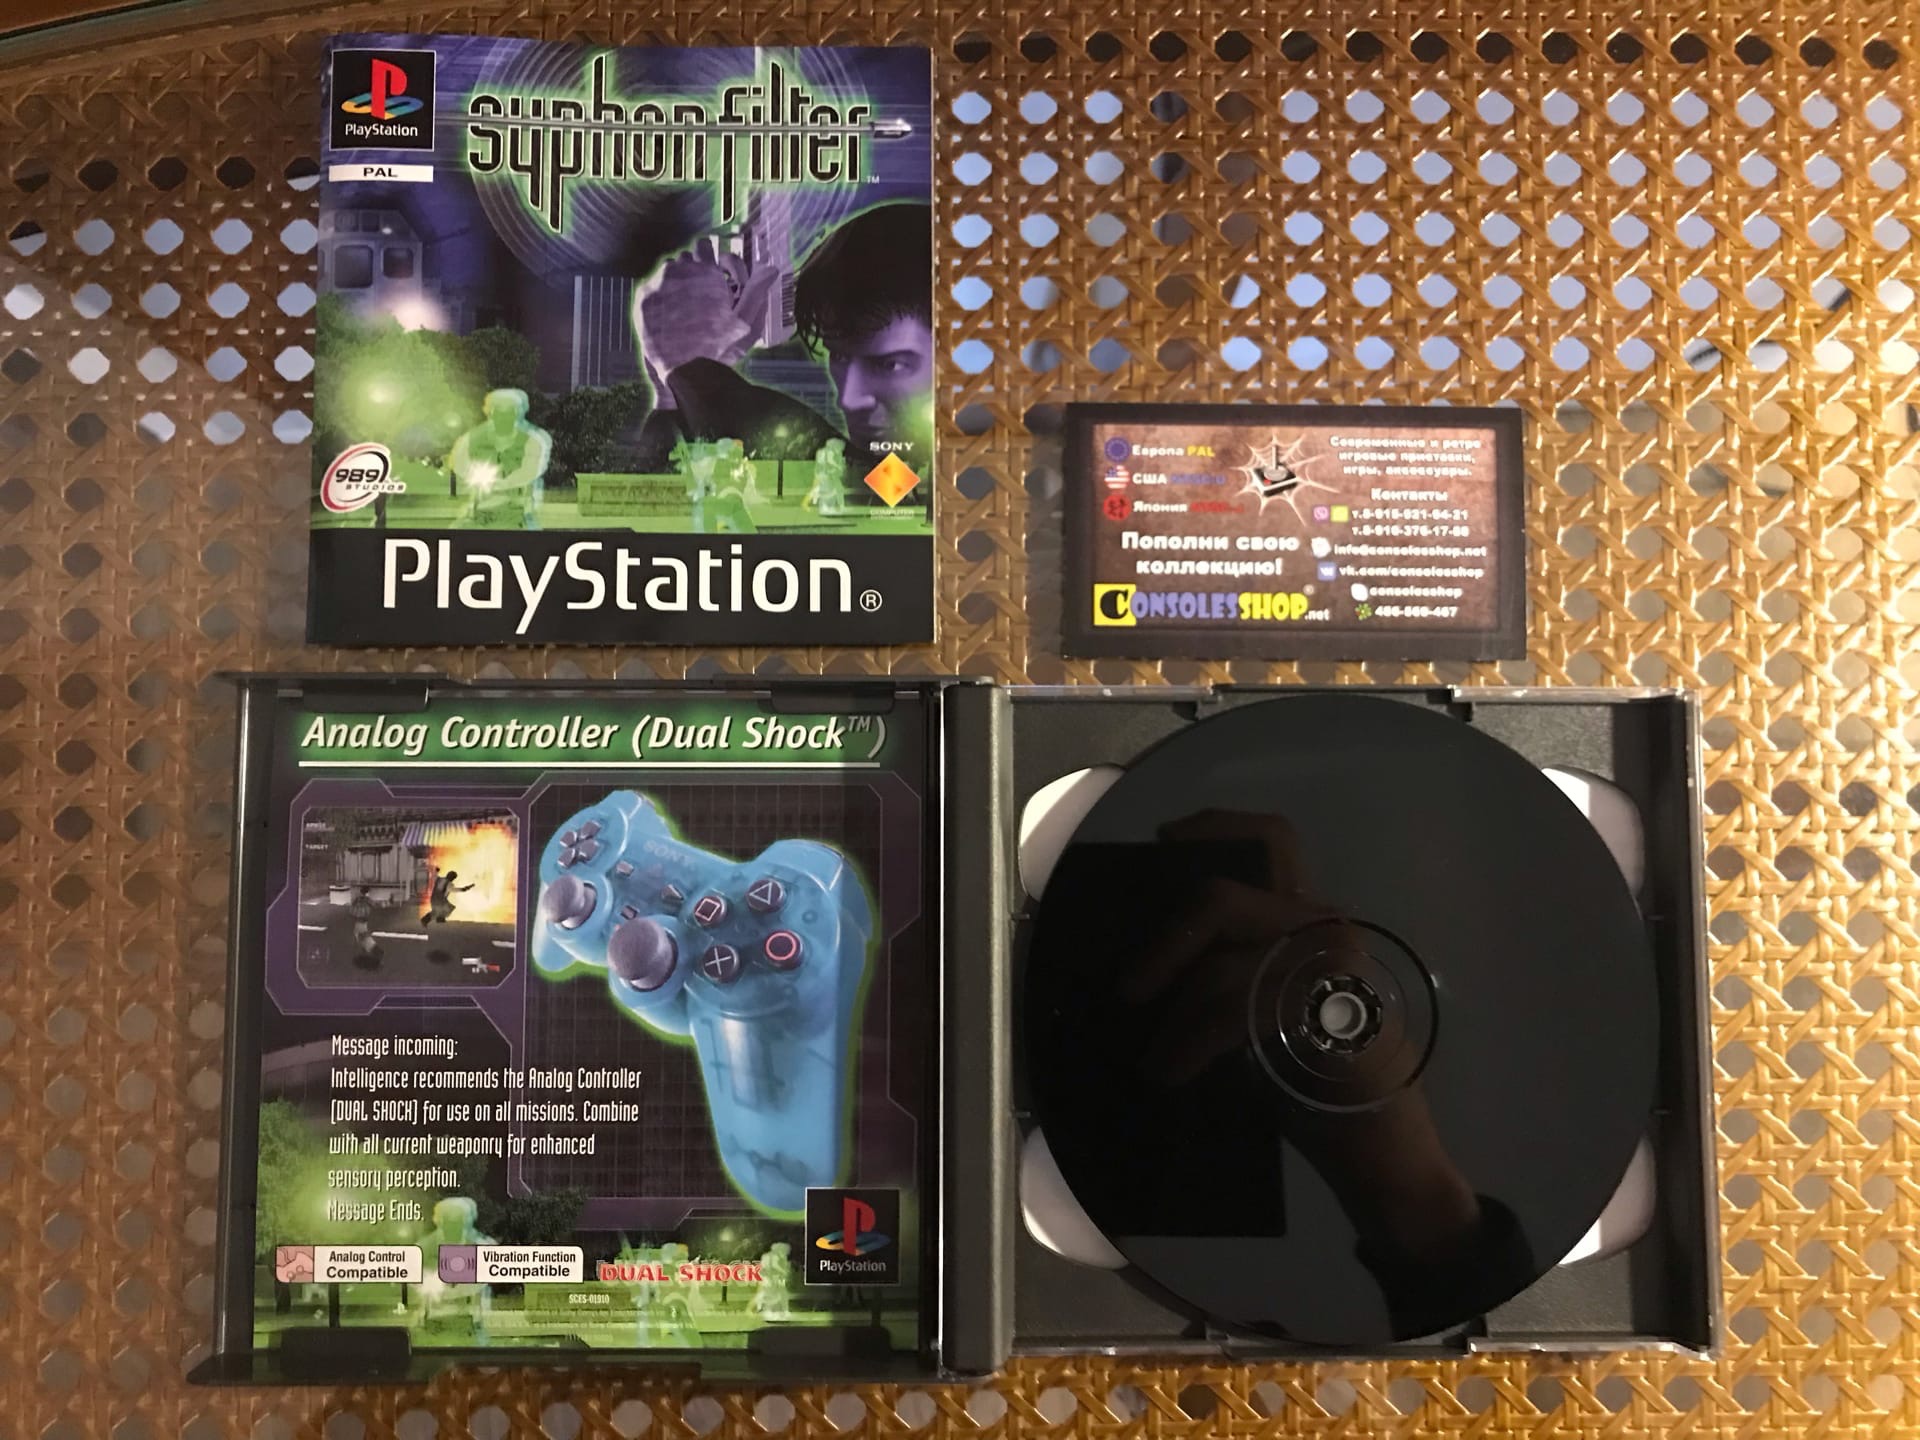 Syphon Filter Playstation PS1 Used